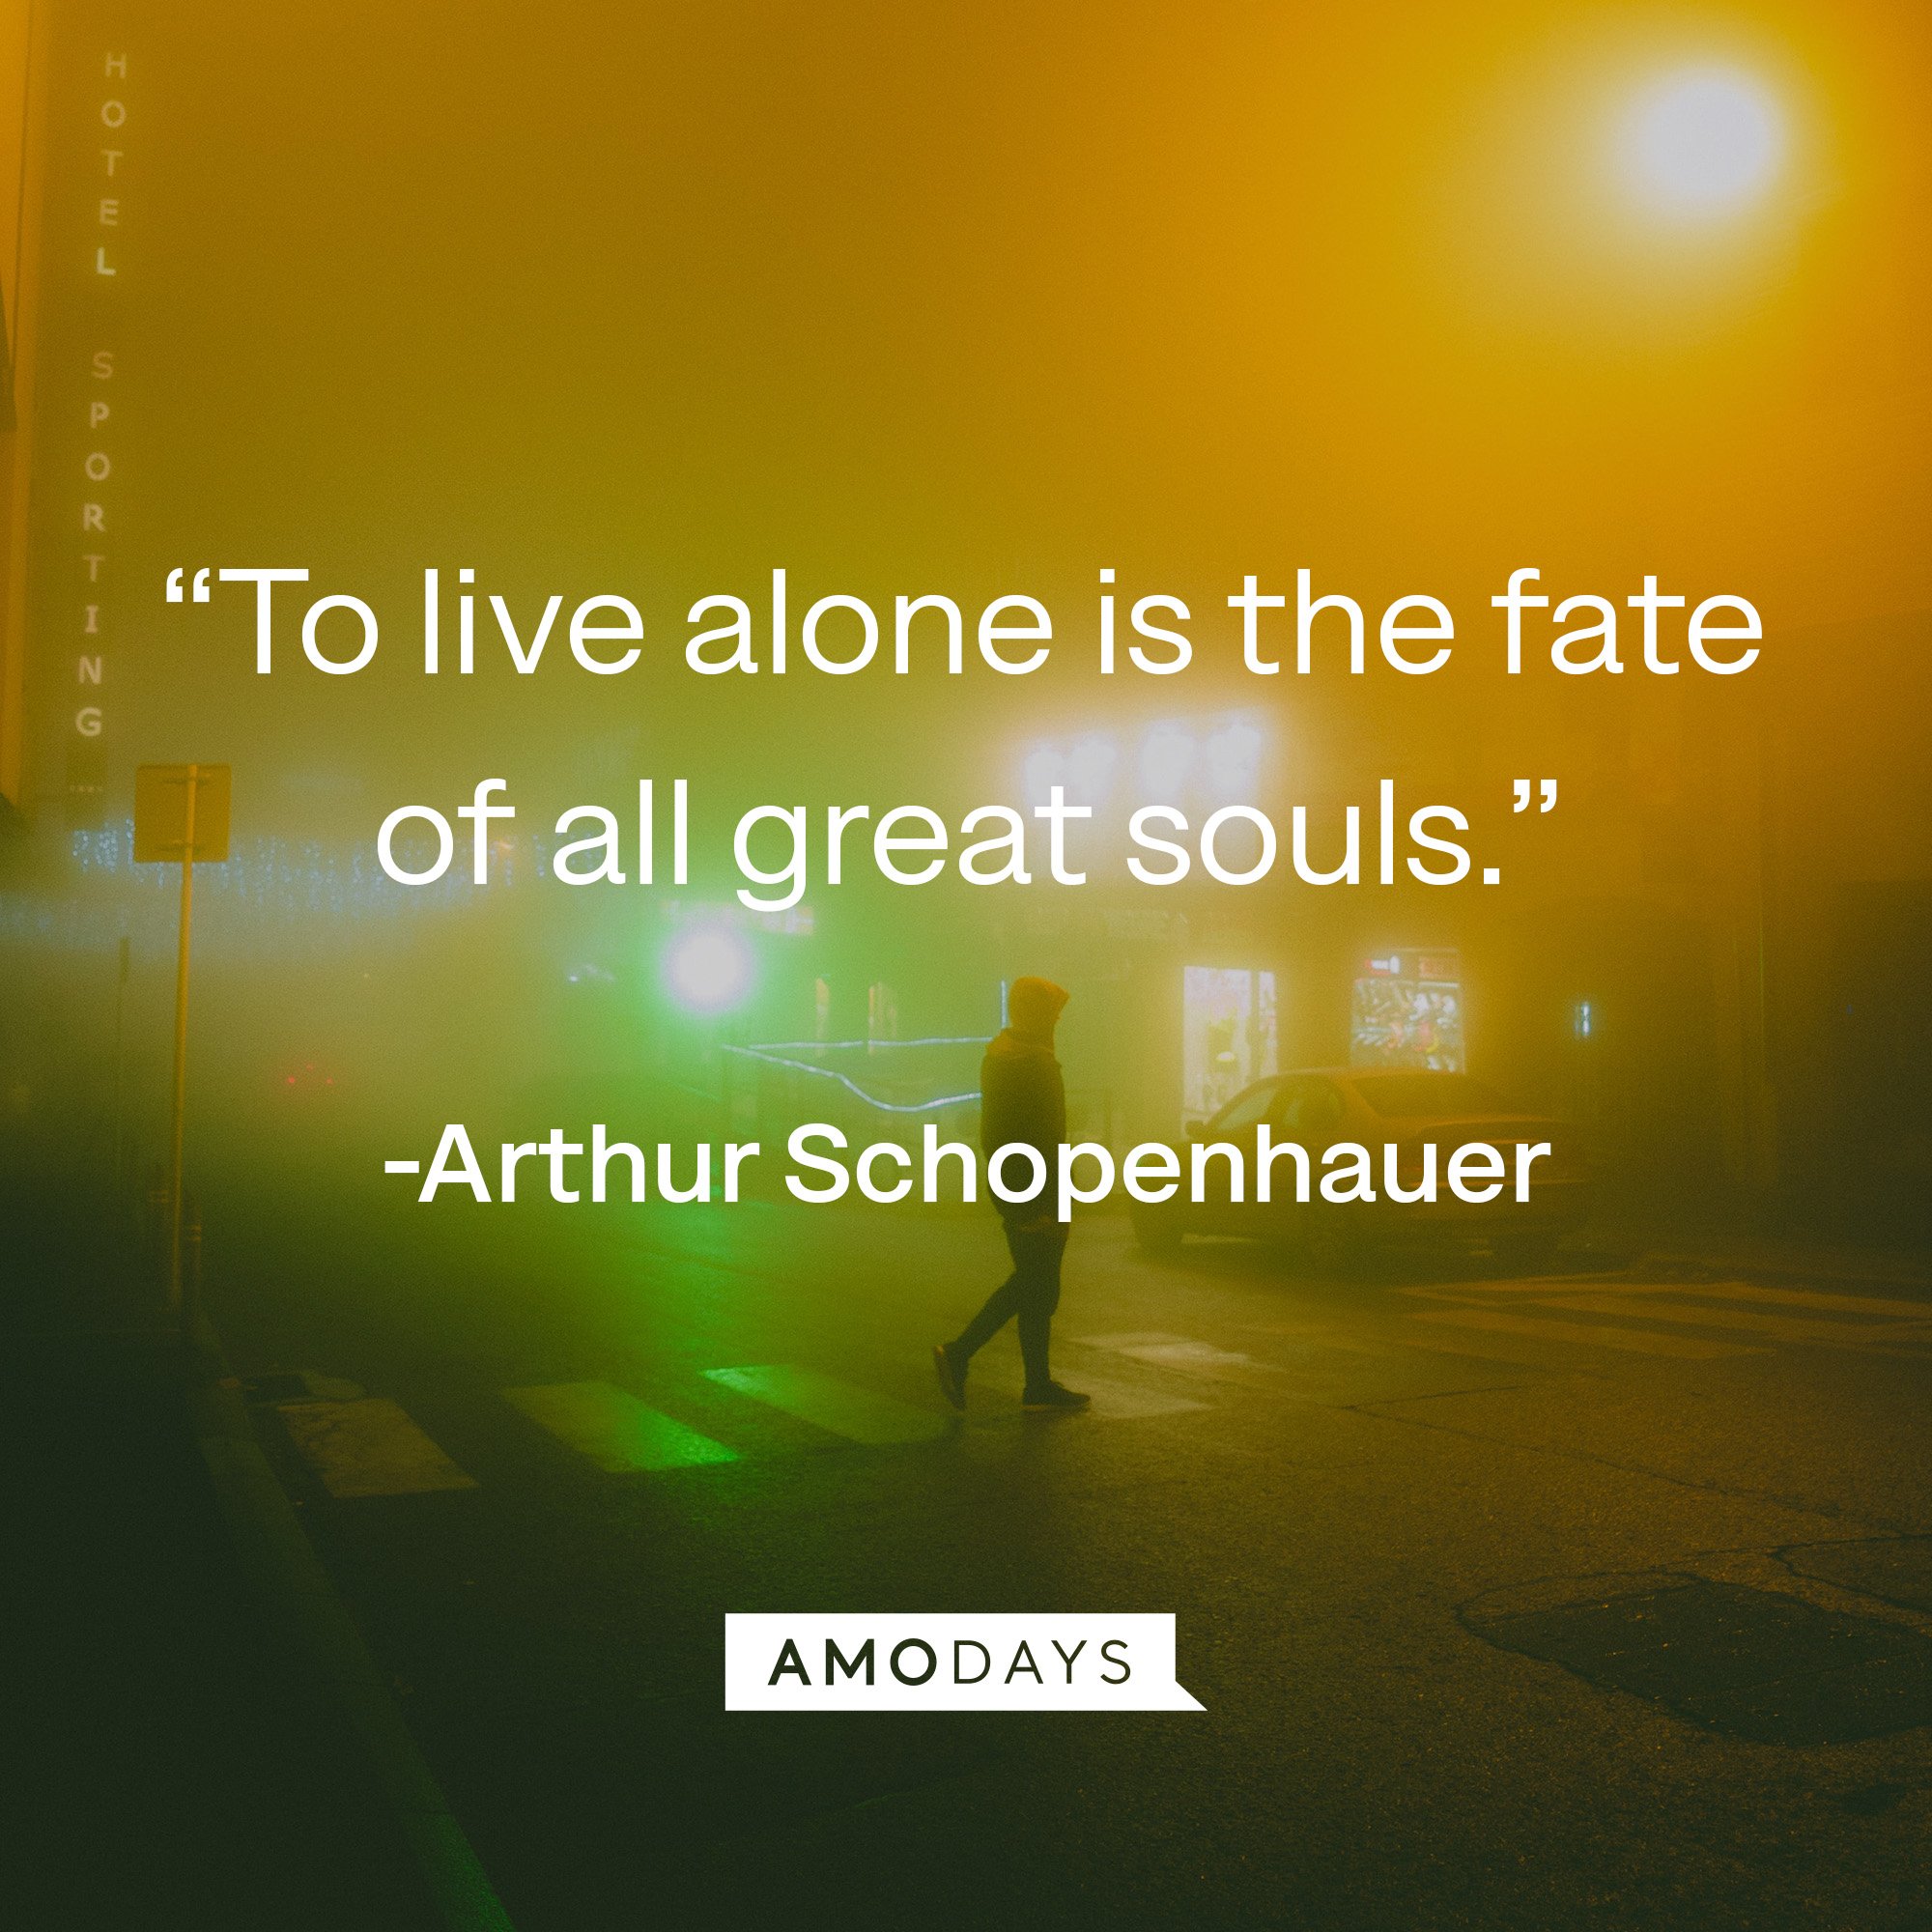 Arthur Schopenhauer’s quote: “To live alone is the fate of all great souls.” | Image: Amodays